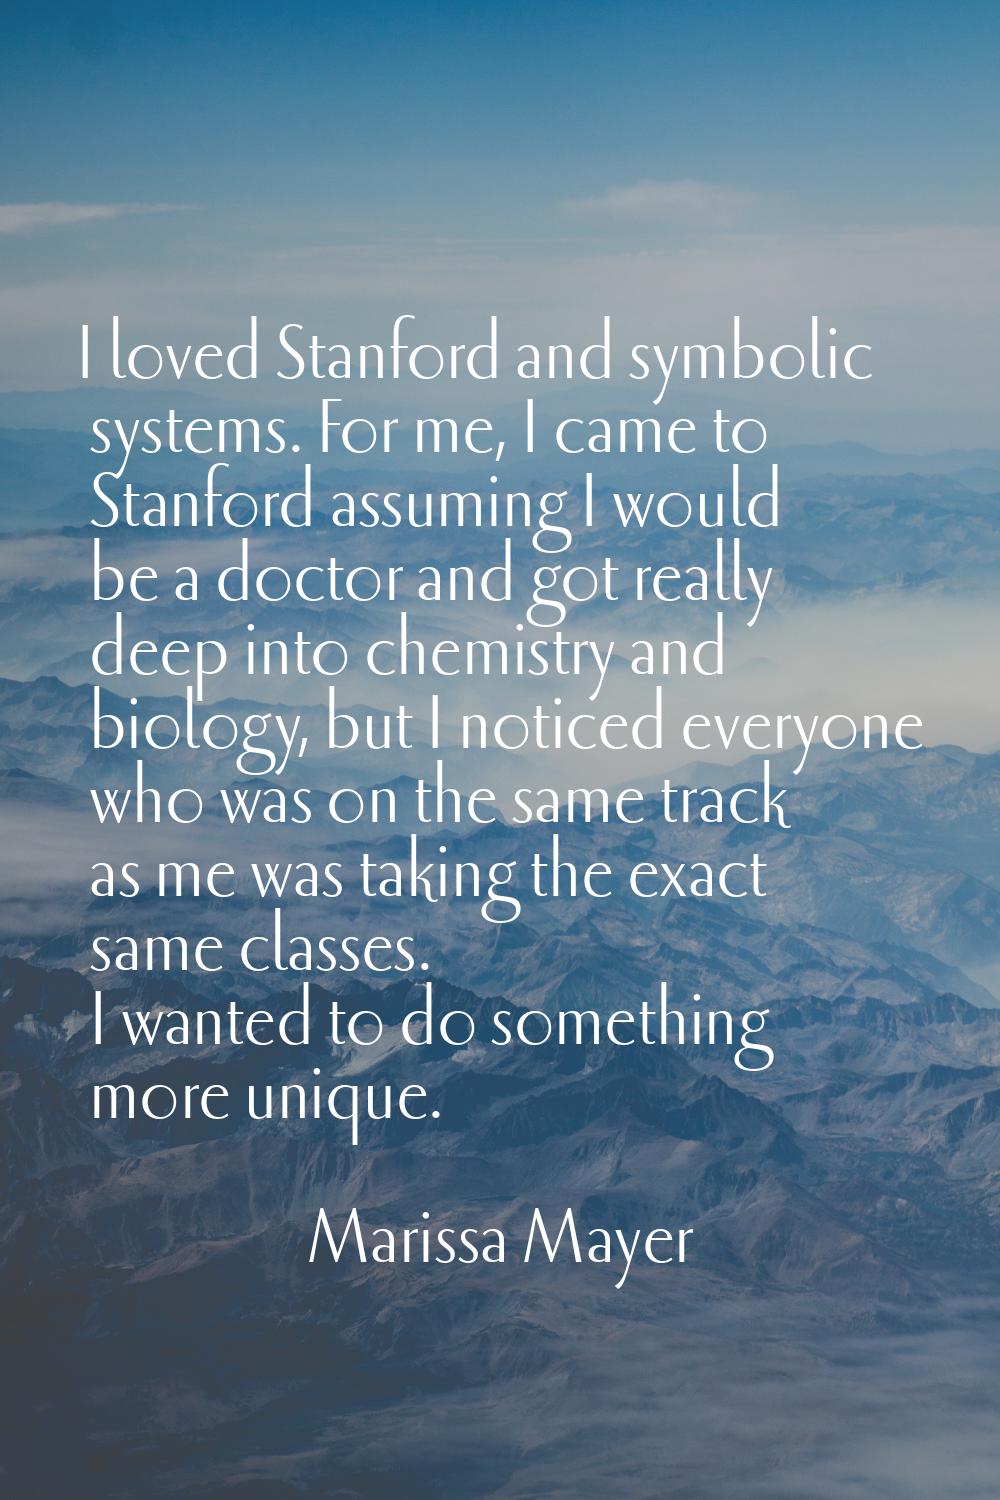 I loved Stanford and symbolic systems. For me, I came to Stanford assuming I would be a doctor and 